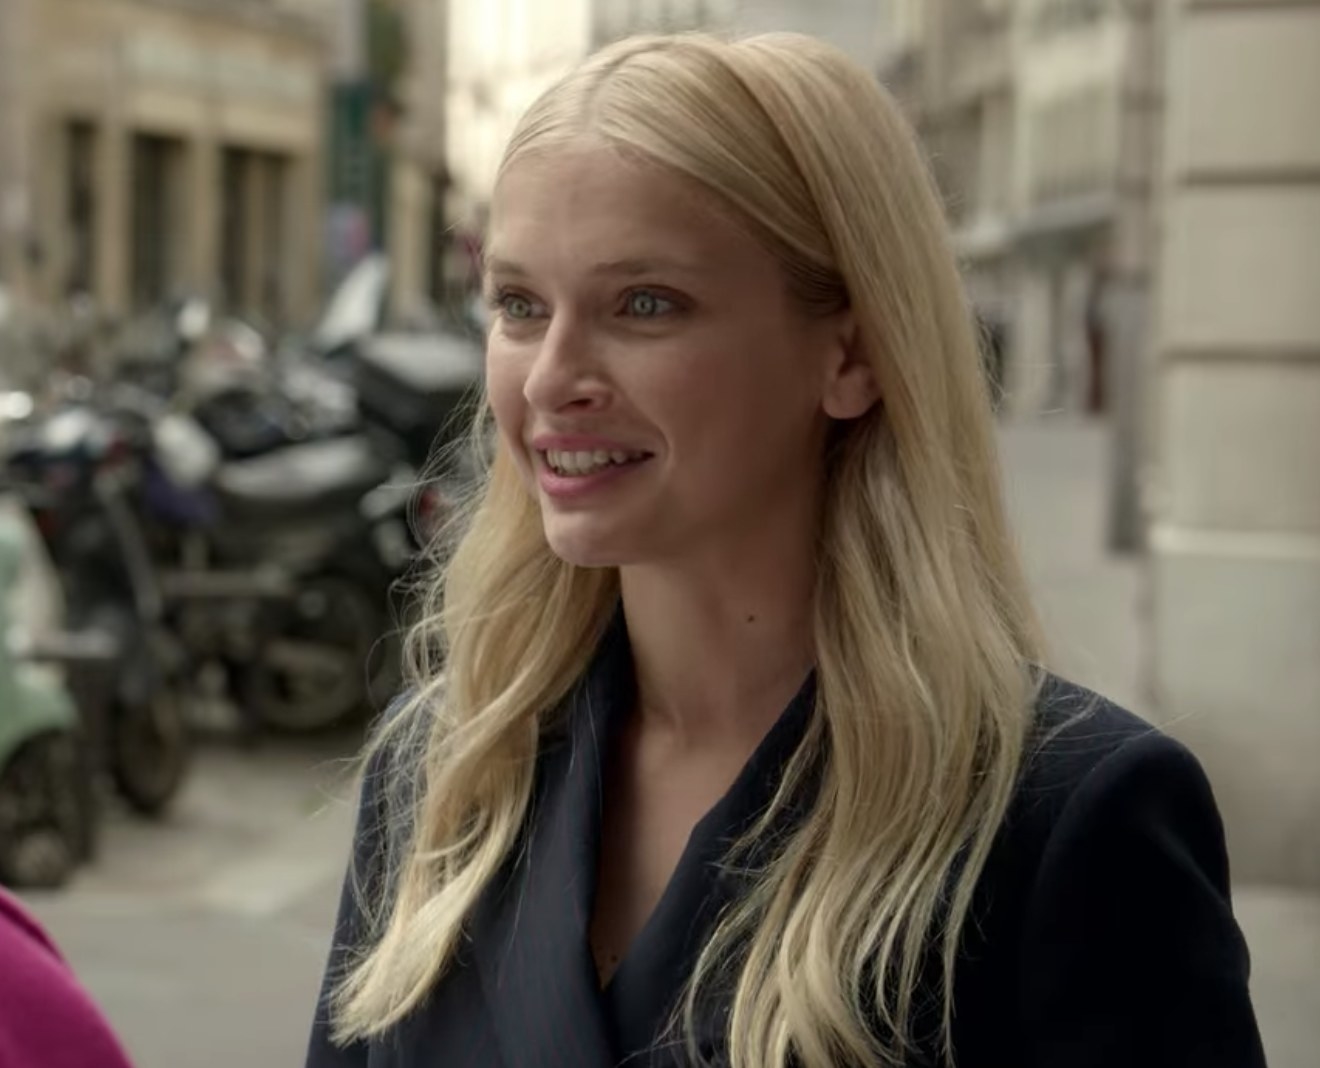 Why Camille is the undercover style star of 'Emily In Paris' - RUSSH